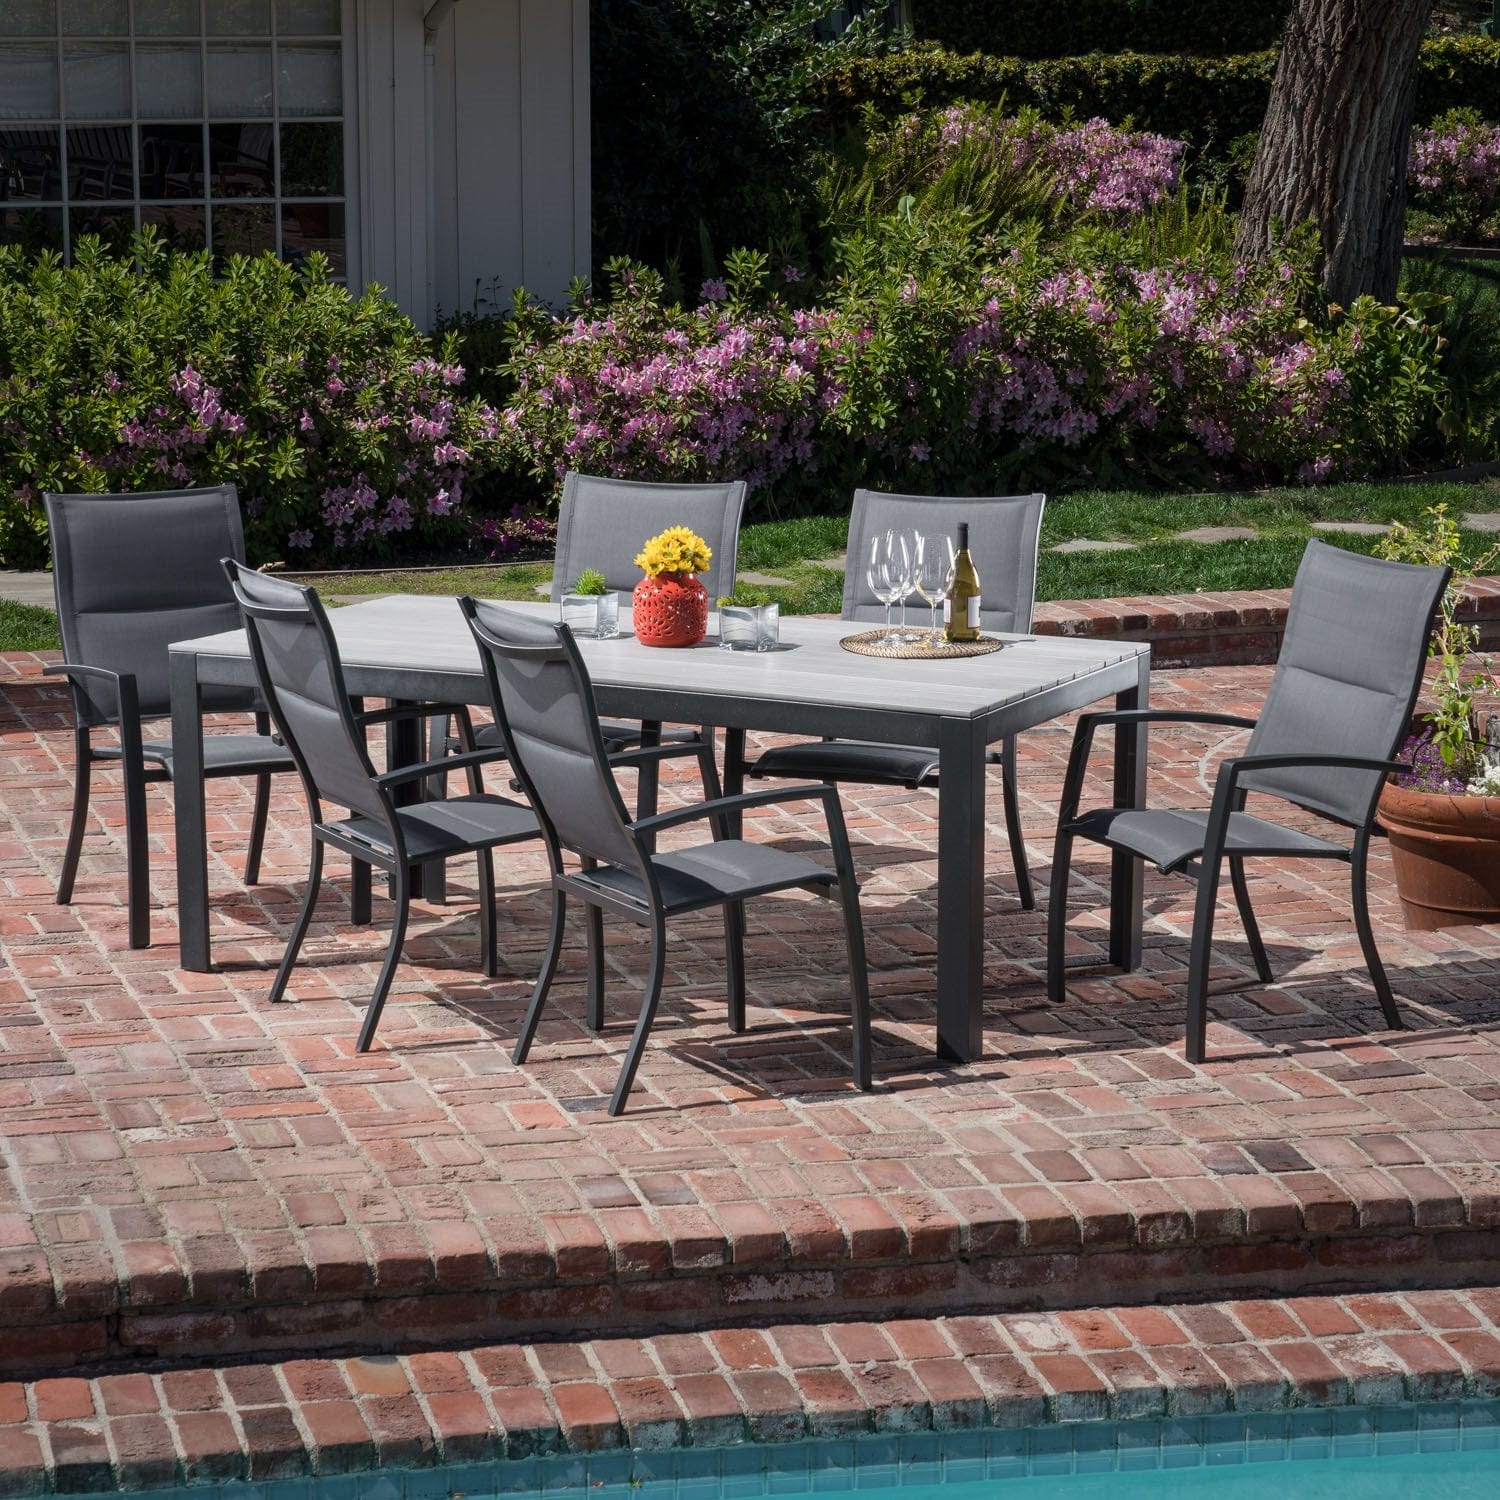 Hanover Outdoor Dining Set Hanover - Tucson7pc: 6 Aluminum High Back Padded Chairs, Faux Wood Dining Table - TUCSDN7PCHB-GRY